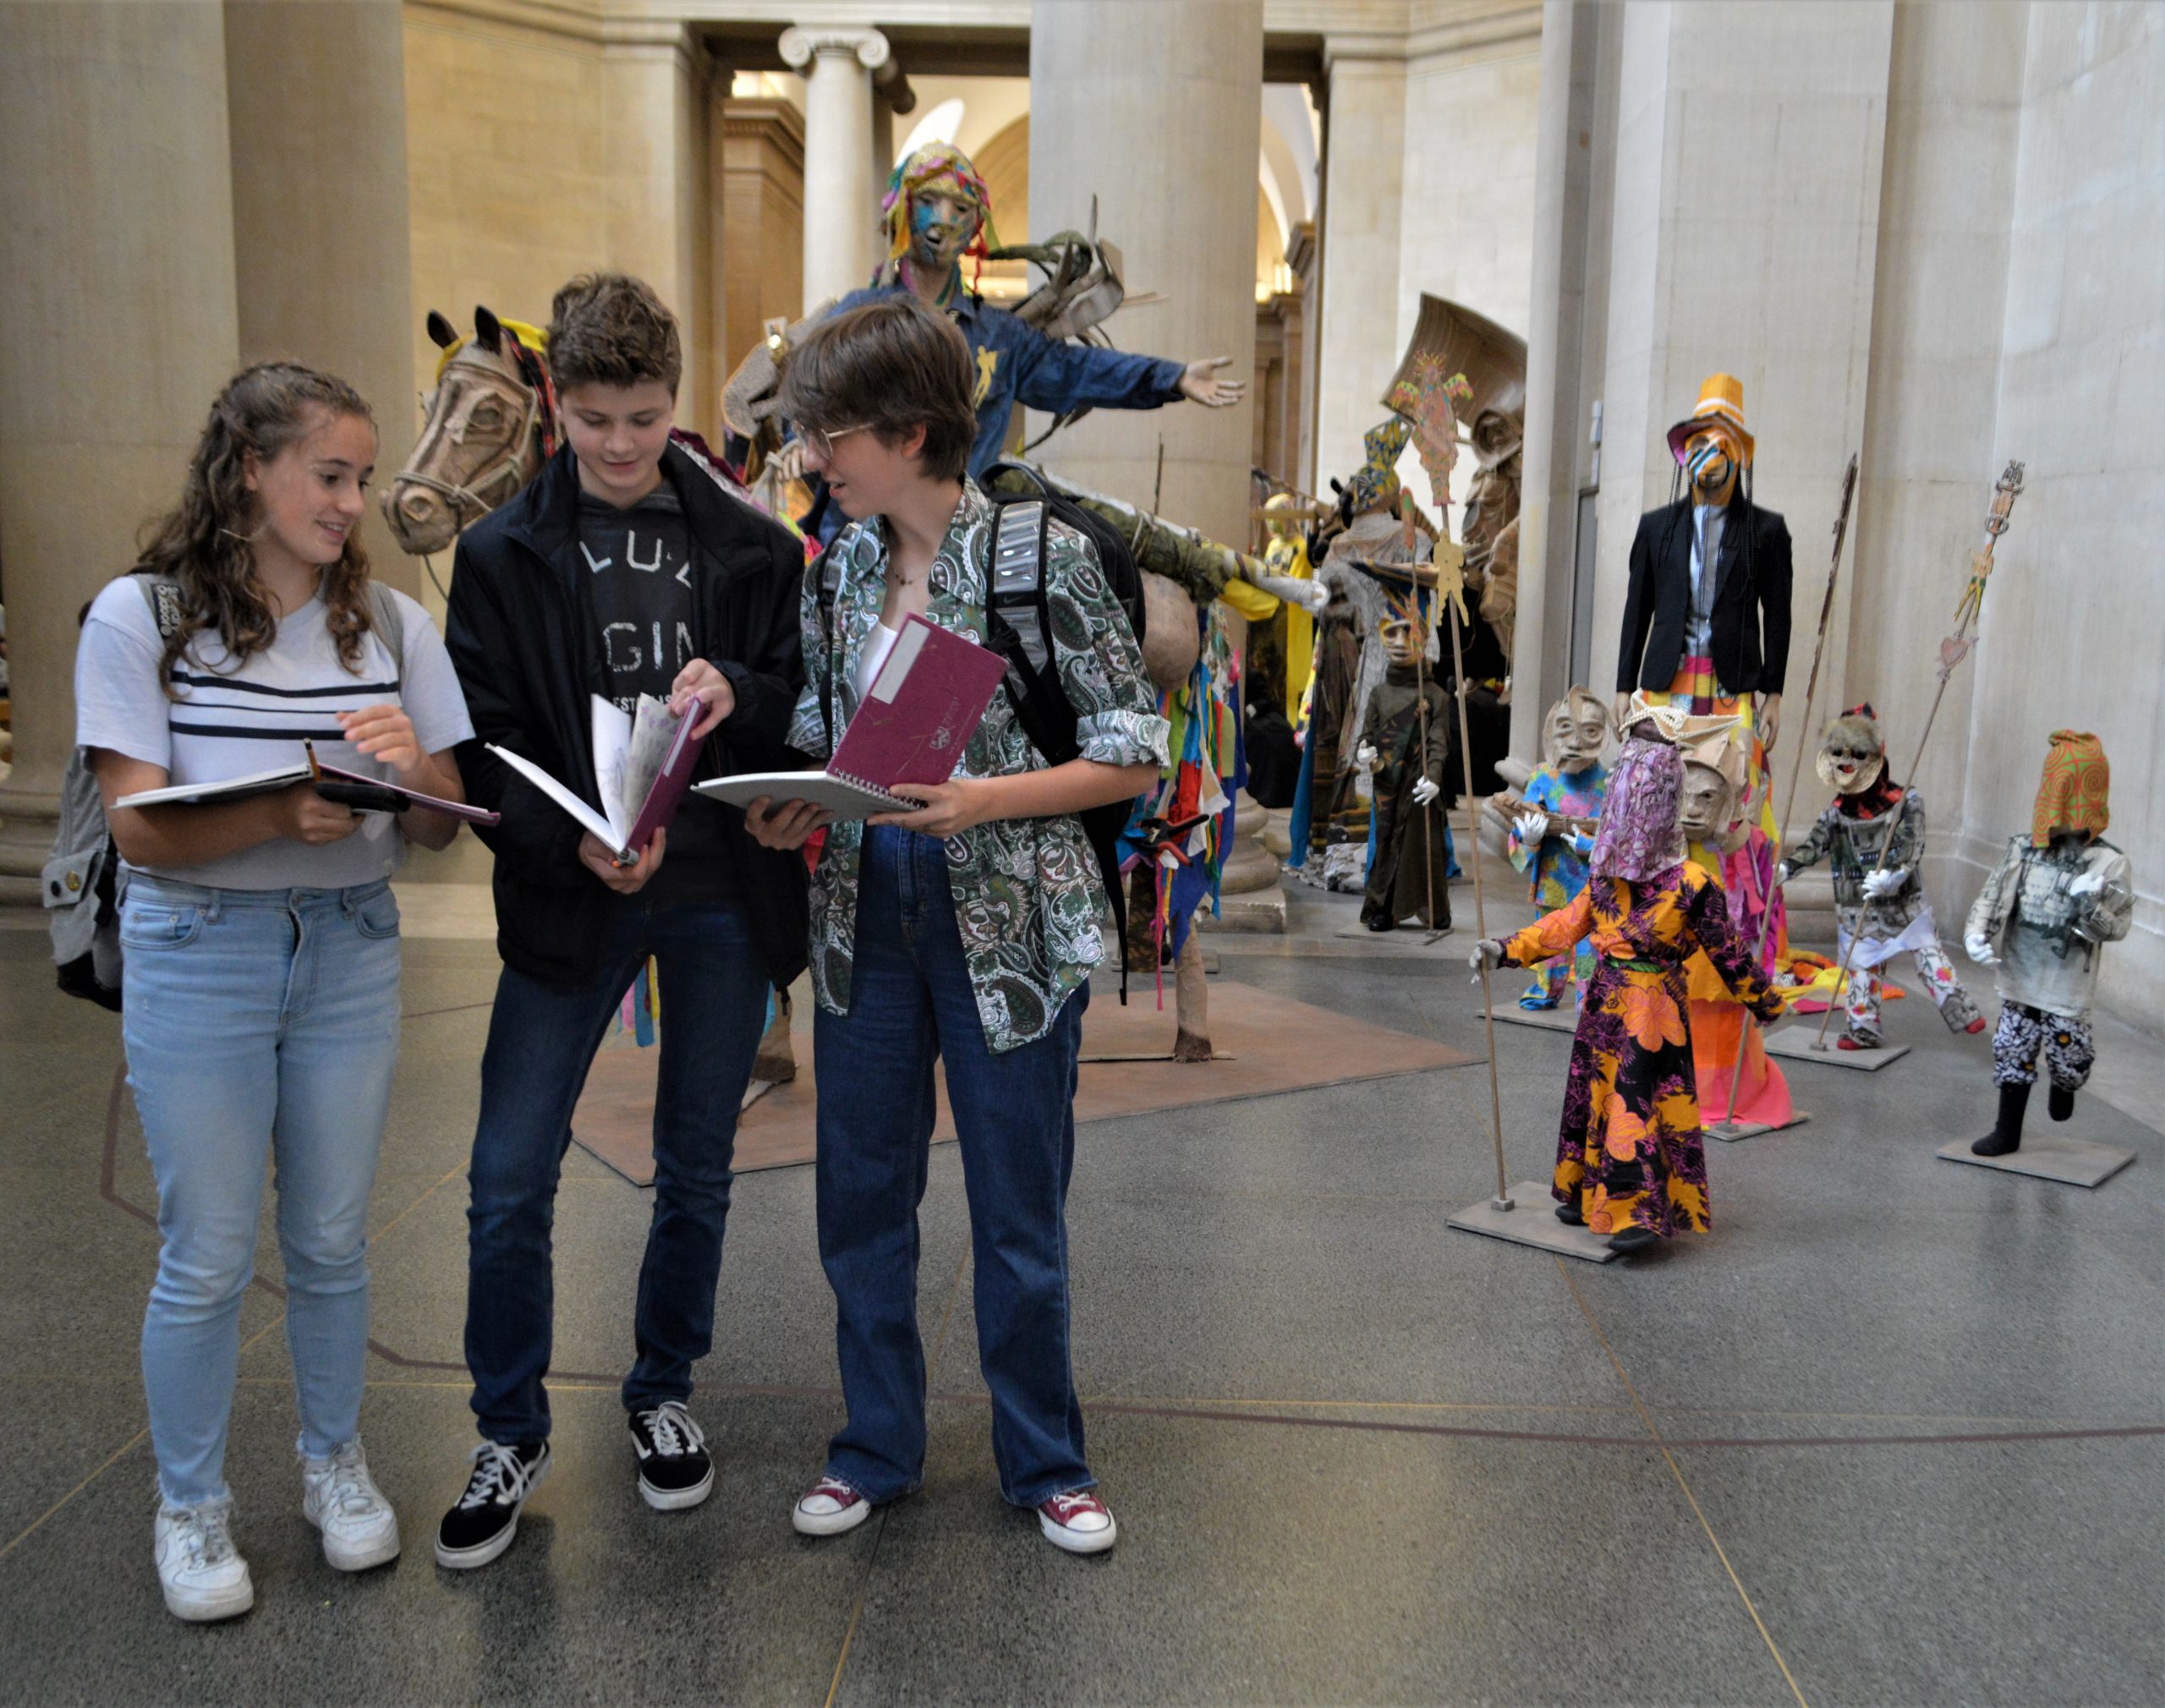 Students at an art museum